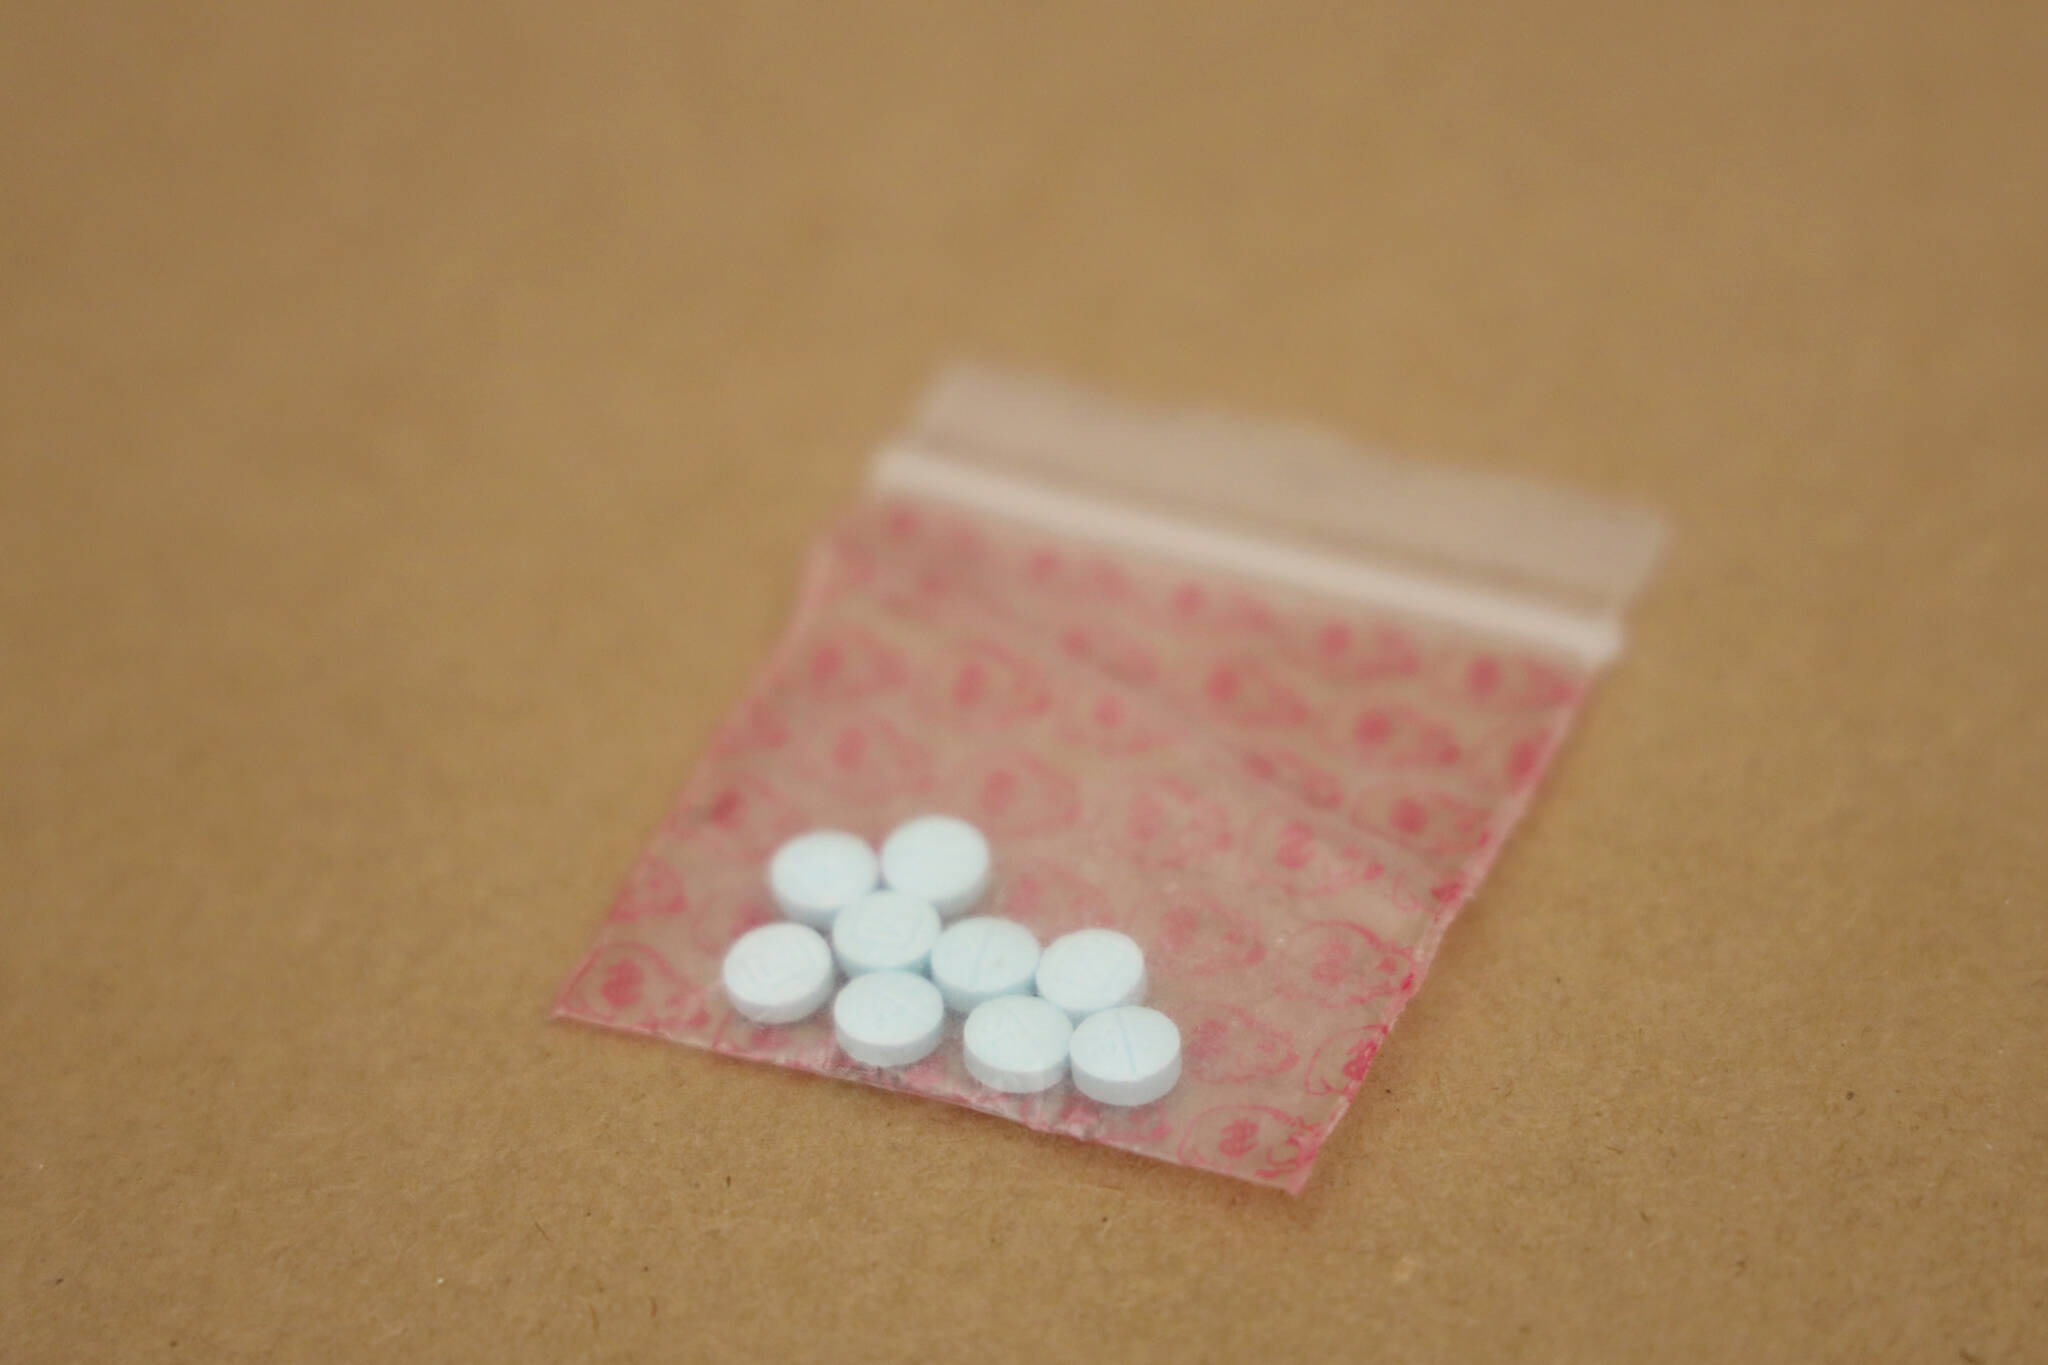 This March 10 photo shows fentanyl pills seized by police. A Juneau woman was arrested Saturday on a felony drug charge and police seized over 6,000 pills suspected to contain fentanyl. (Clarise Larson / Juneau Empire File)